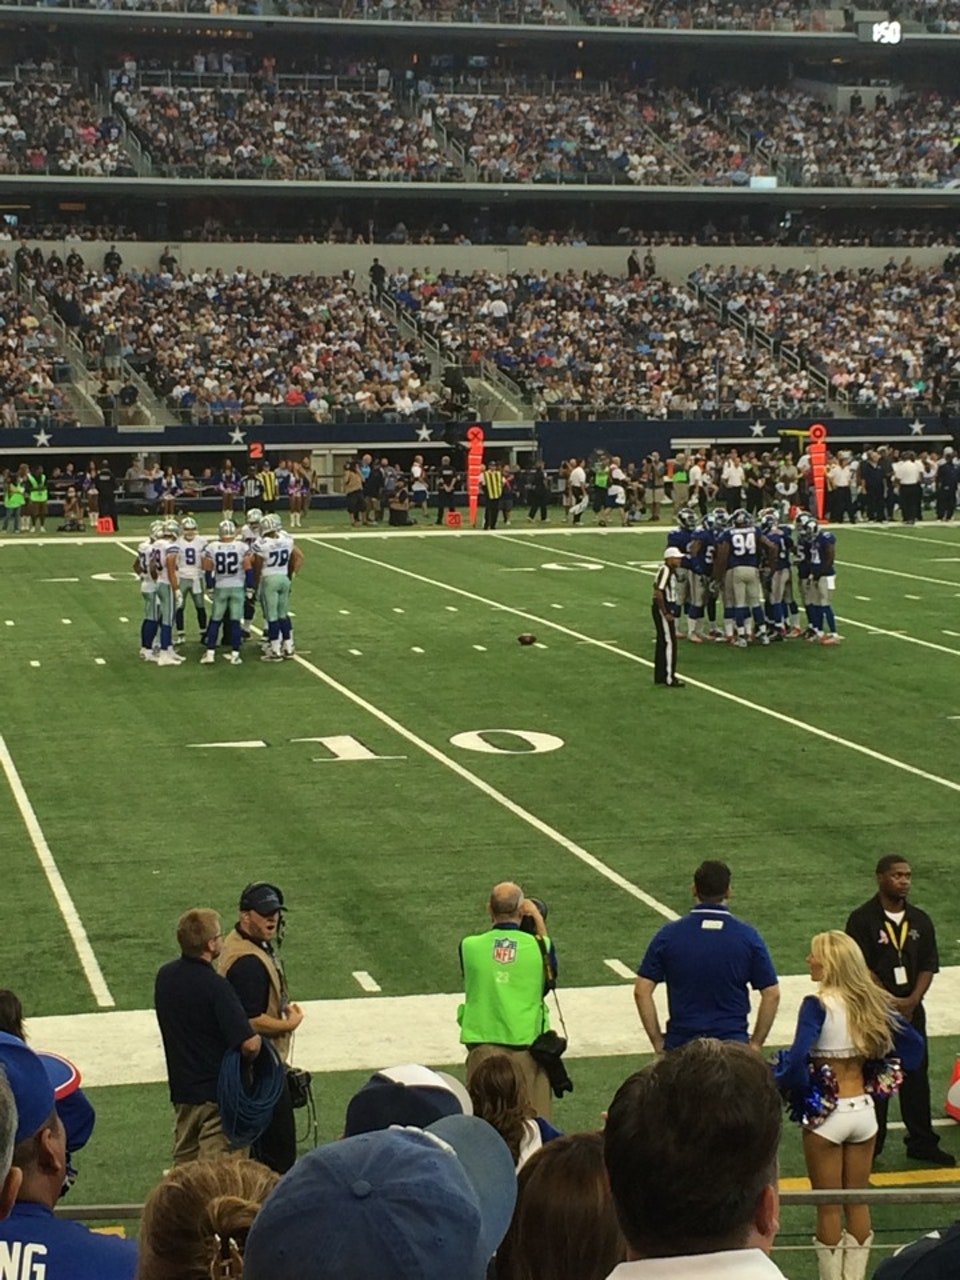 section c139, row 5 seat view  for football - at&t stadium (cowboys stadium)